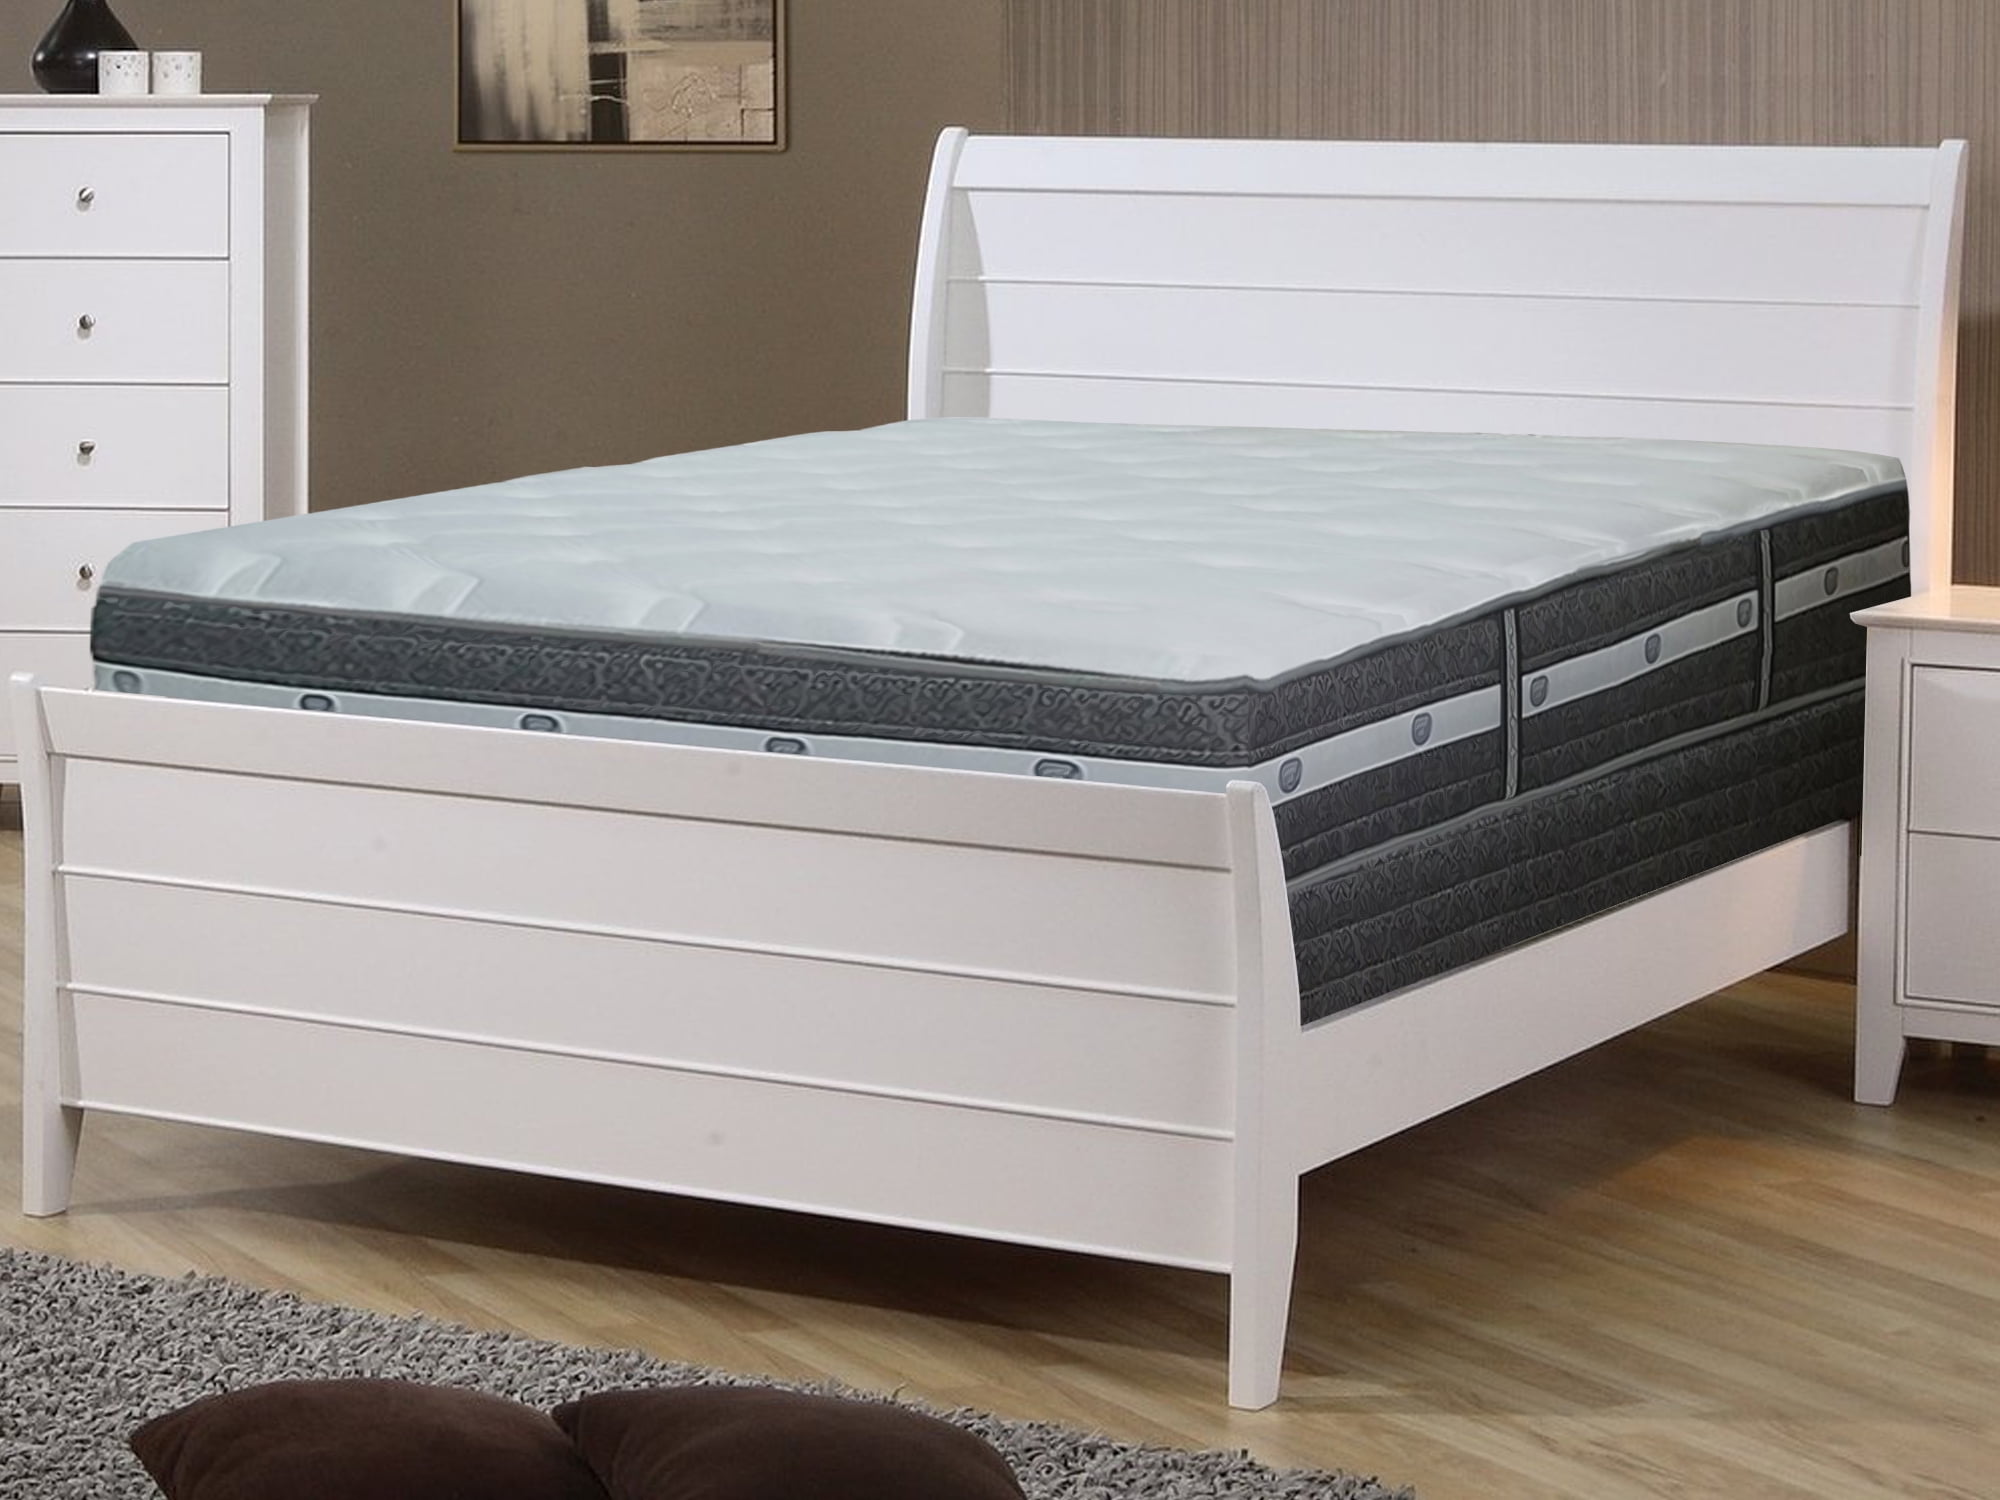 queen size mattress and frame and headboard set